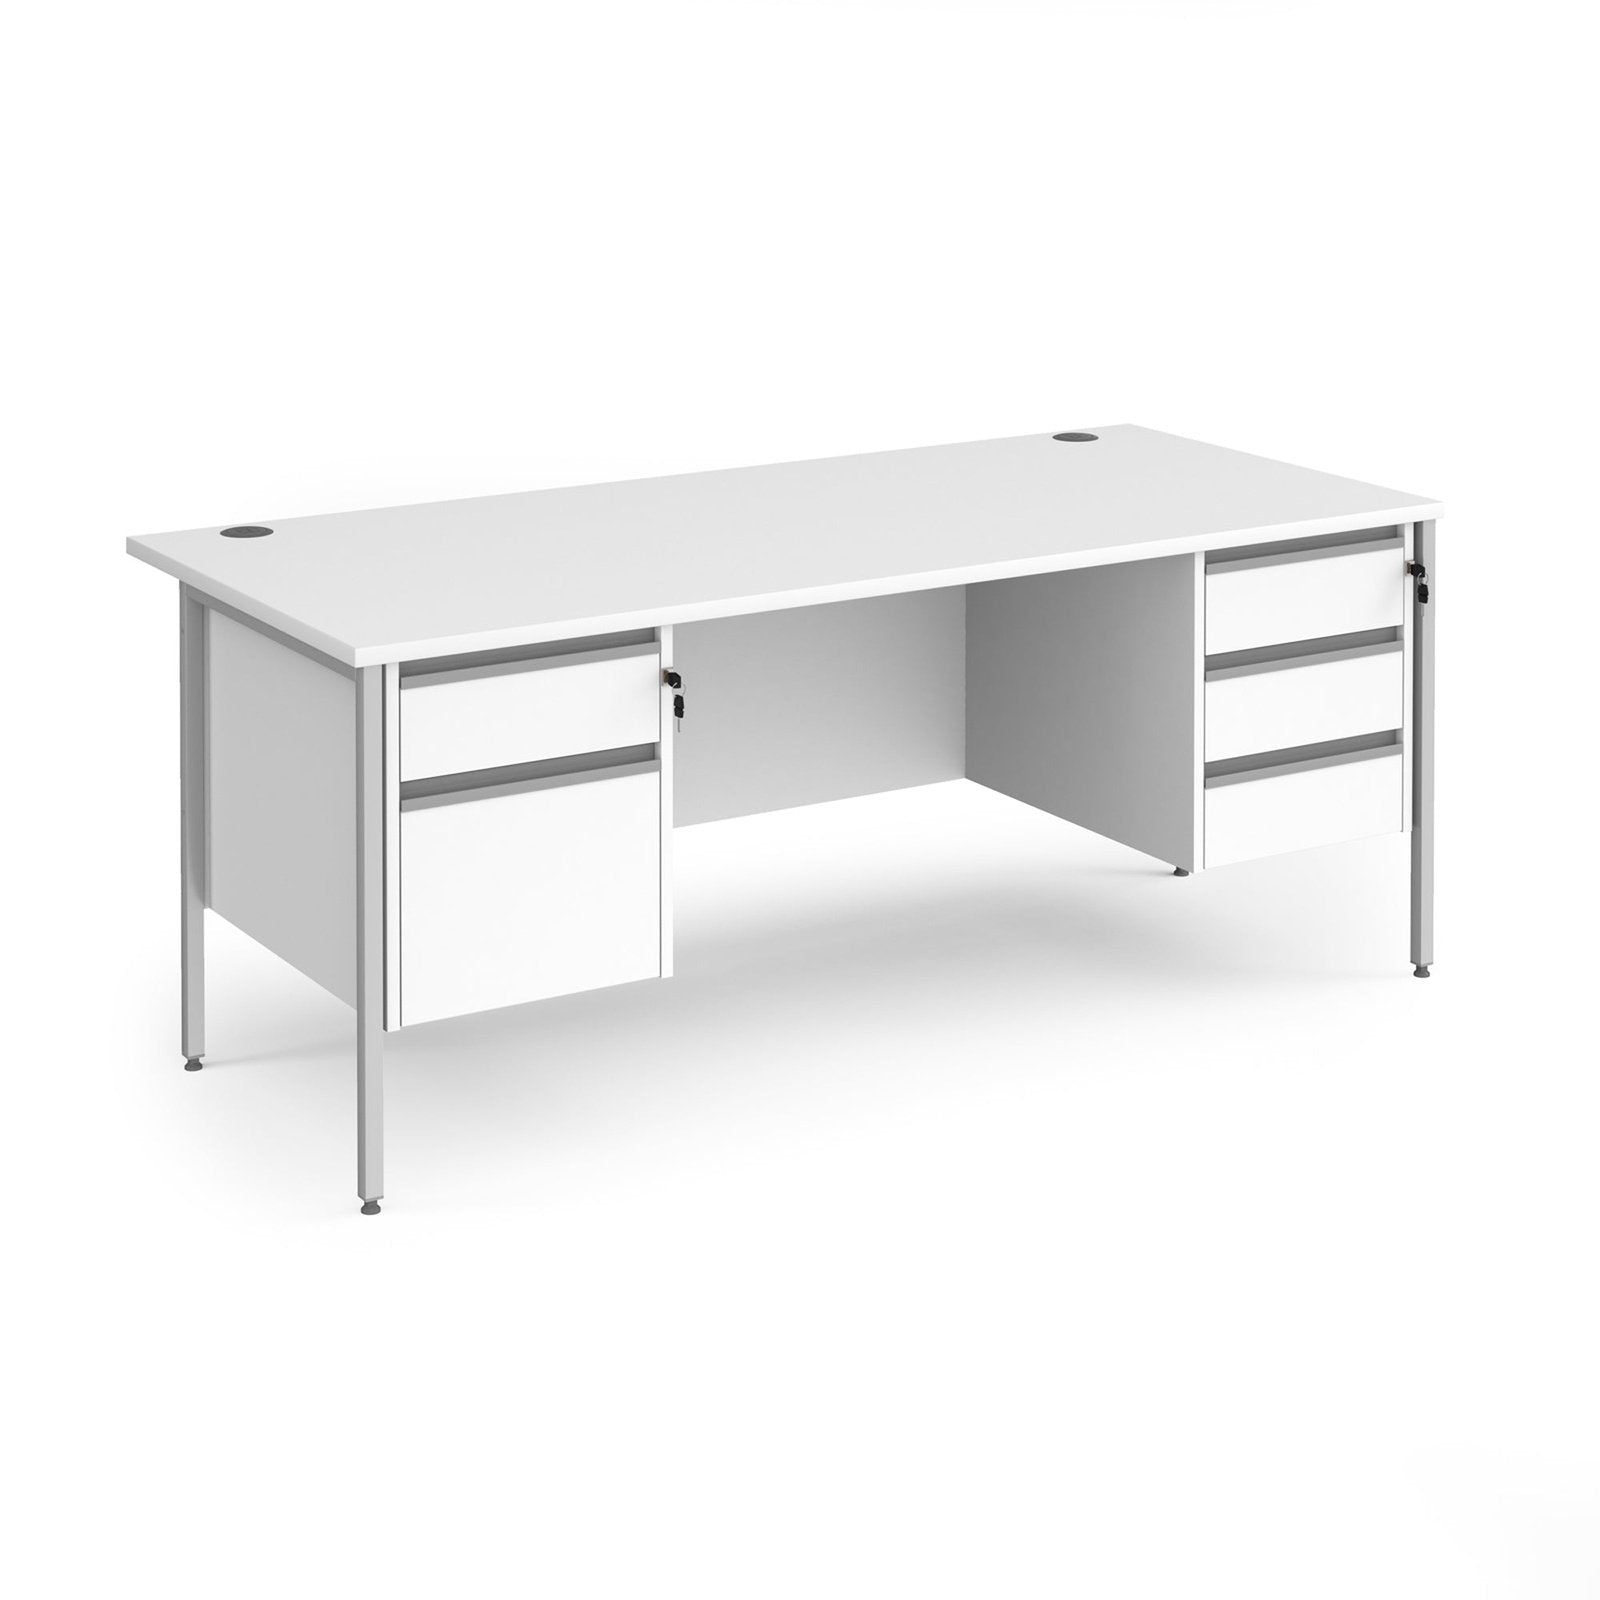 Contract 25 straight desk with 2 3 drawer pedestals and H-Frame leg - Office Products Online